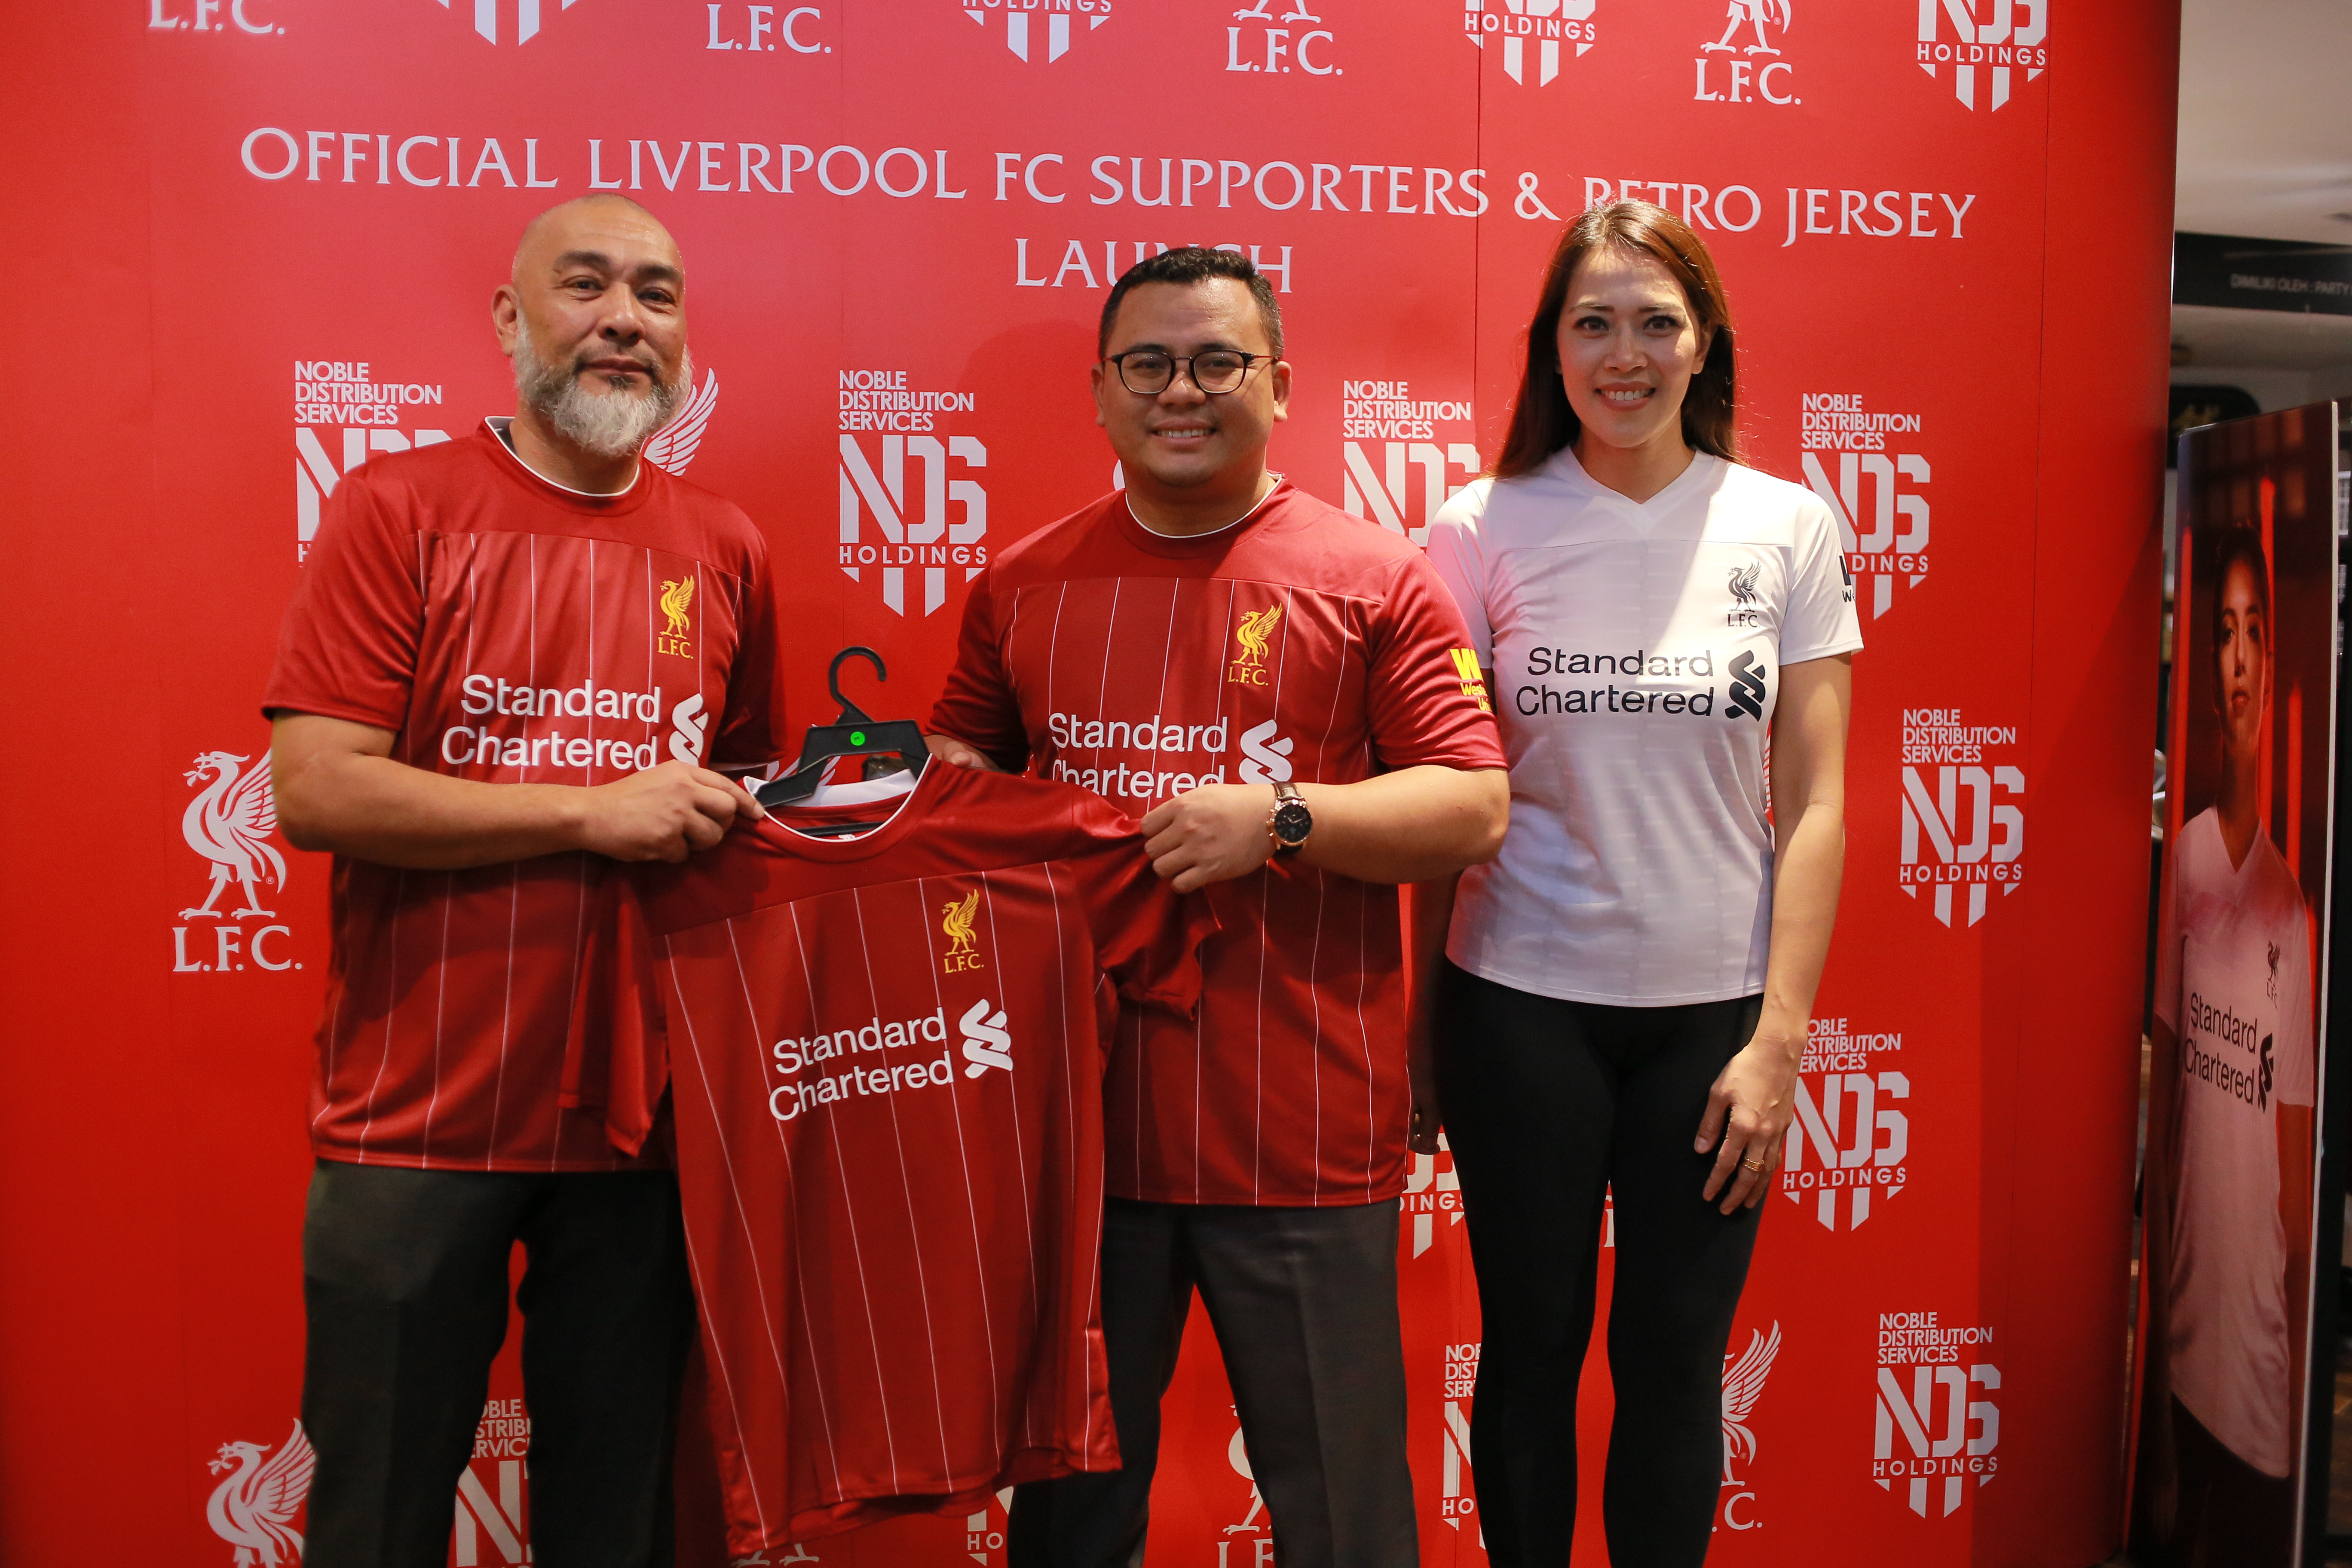 lfc supporter jersey